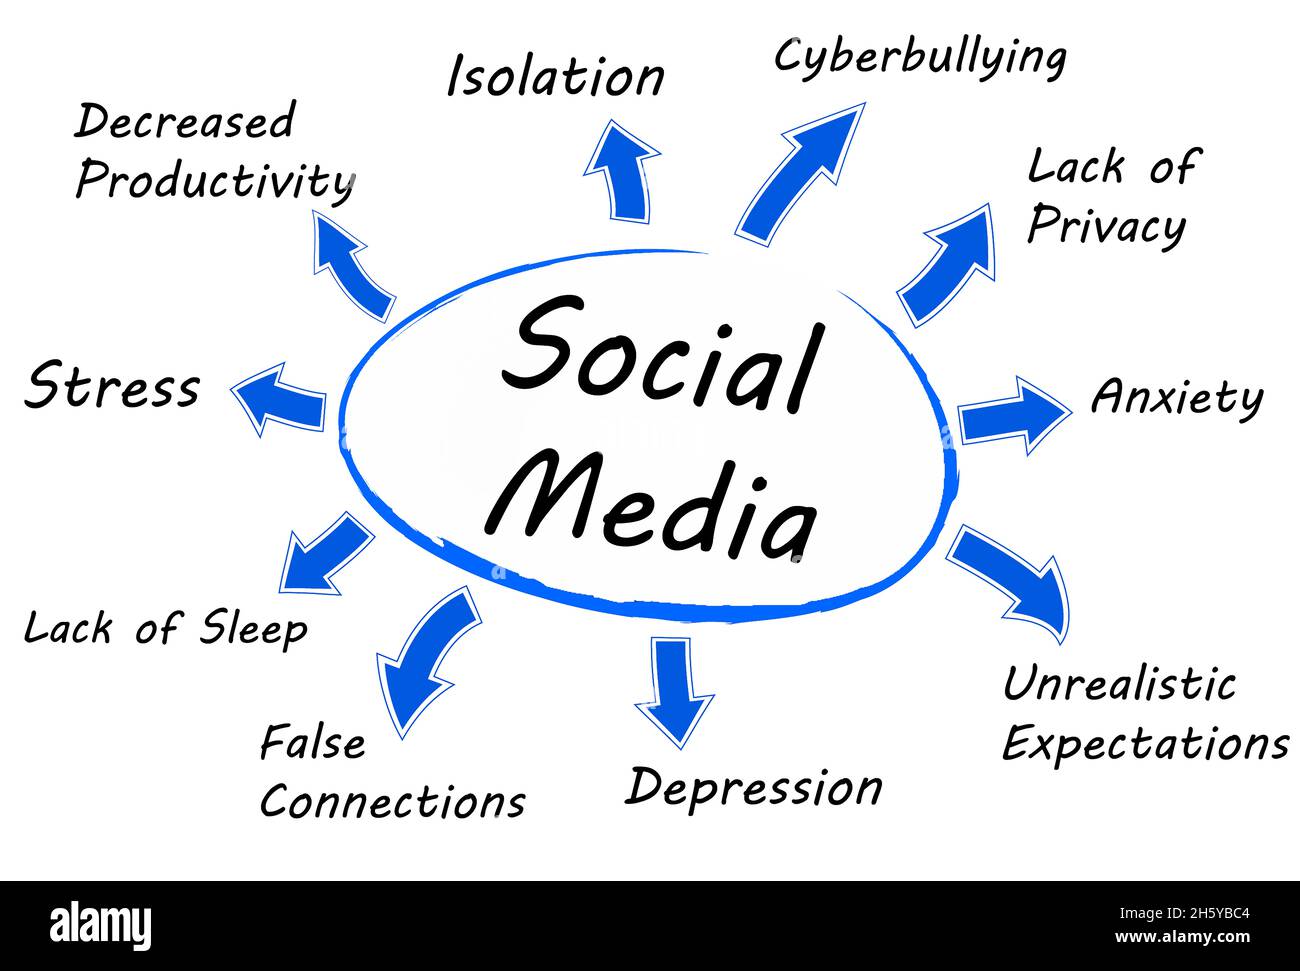 The Bad Effects of Social Media on Mental Health